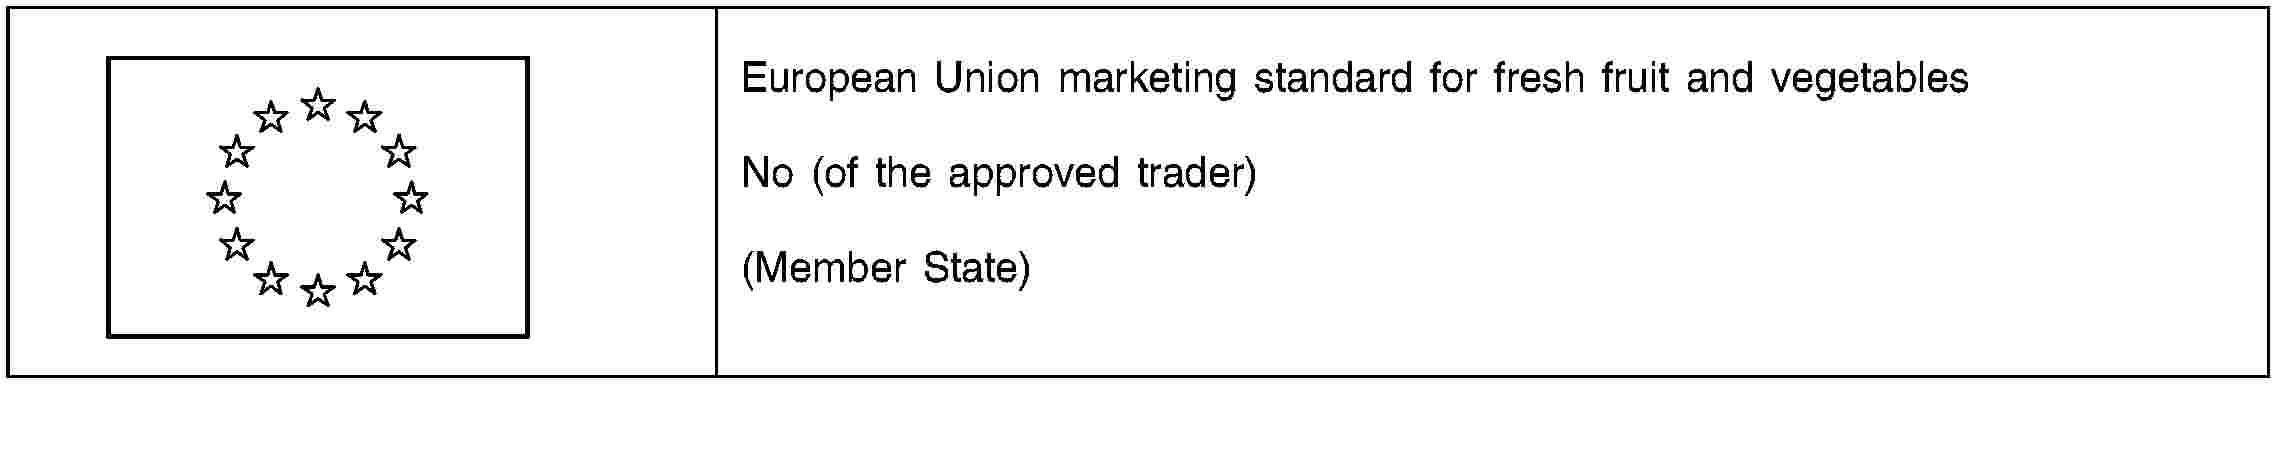 European Union marketing standard for fresh fruit and vegetablesNo (of the approved trader)(Member State)